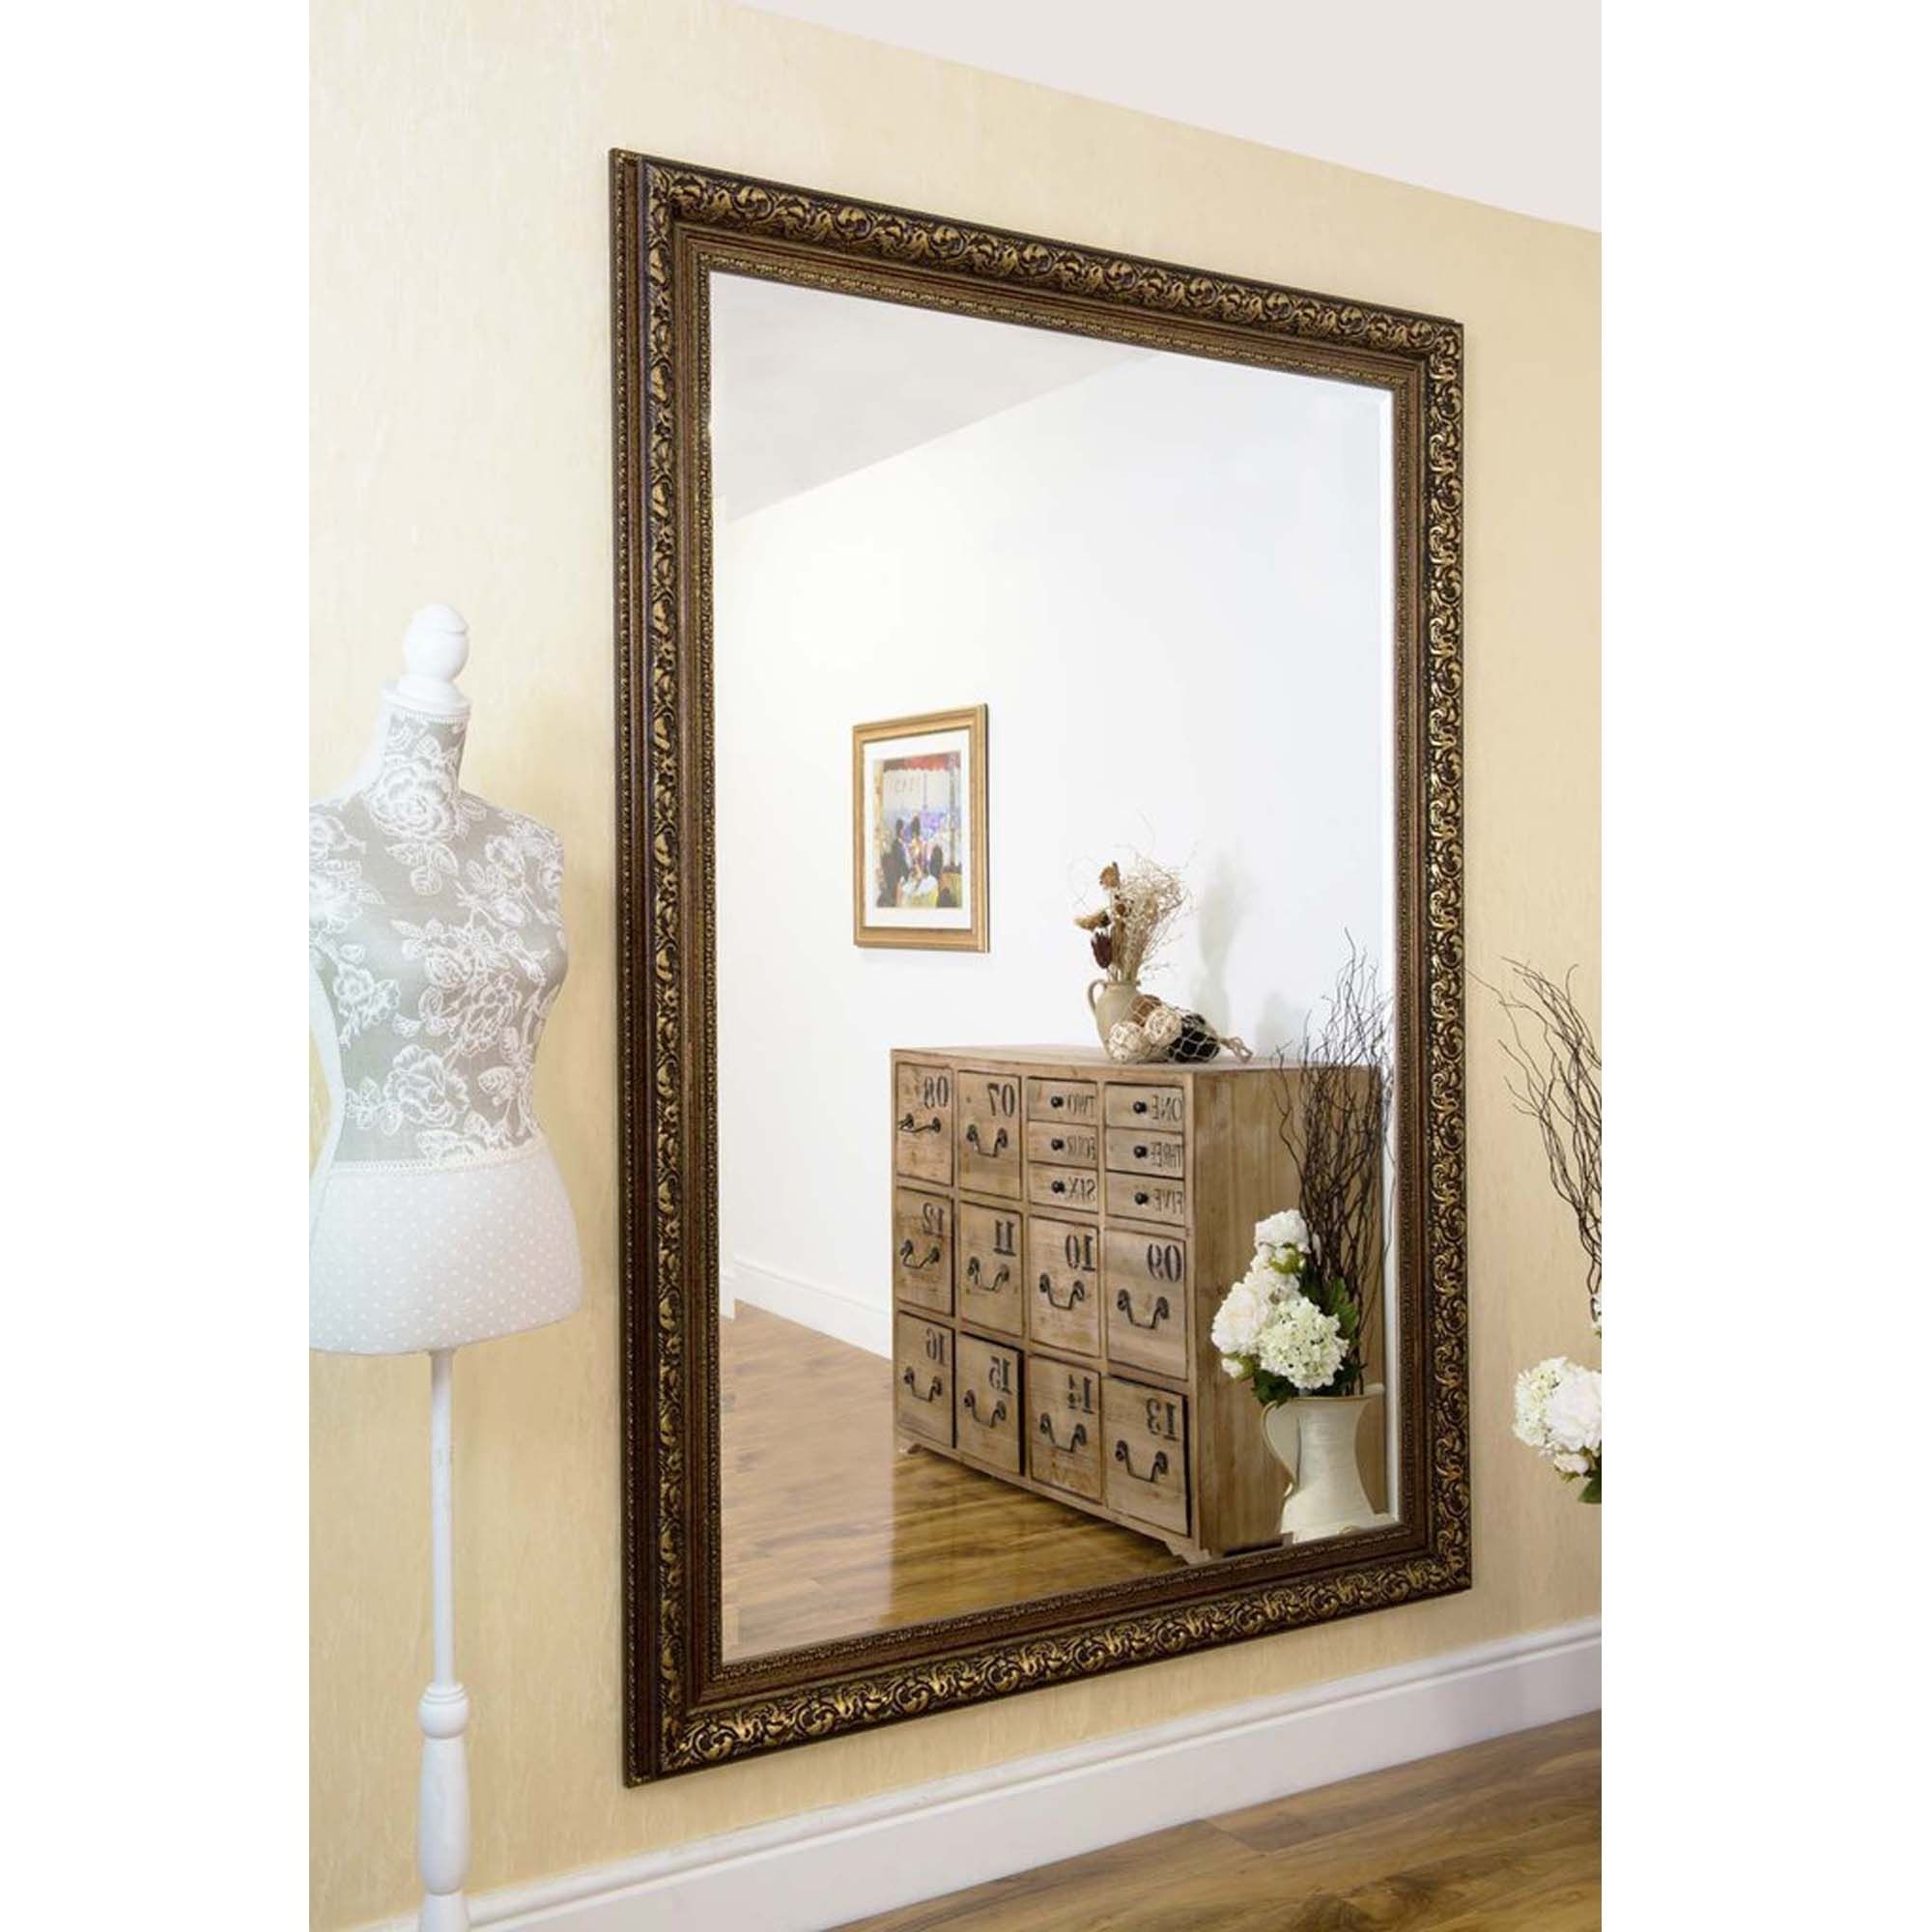 Large Rectangular Antique French Style Bronze Wall Mirror | Hd365 Inside Squared Corner Rectangular Wall Mirrors (View 8 of 15)